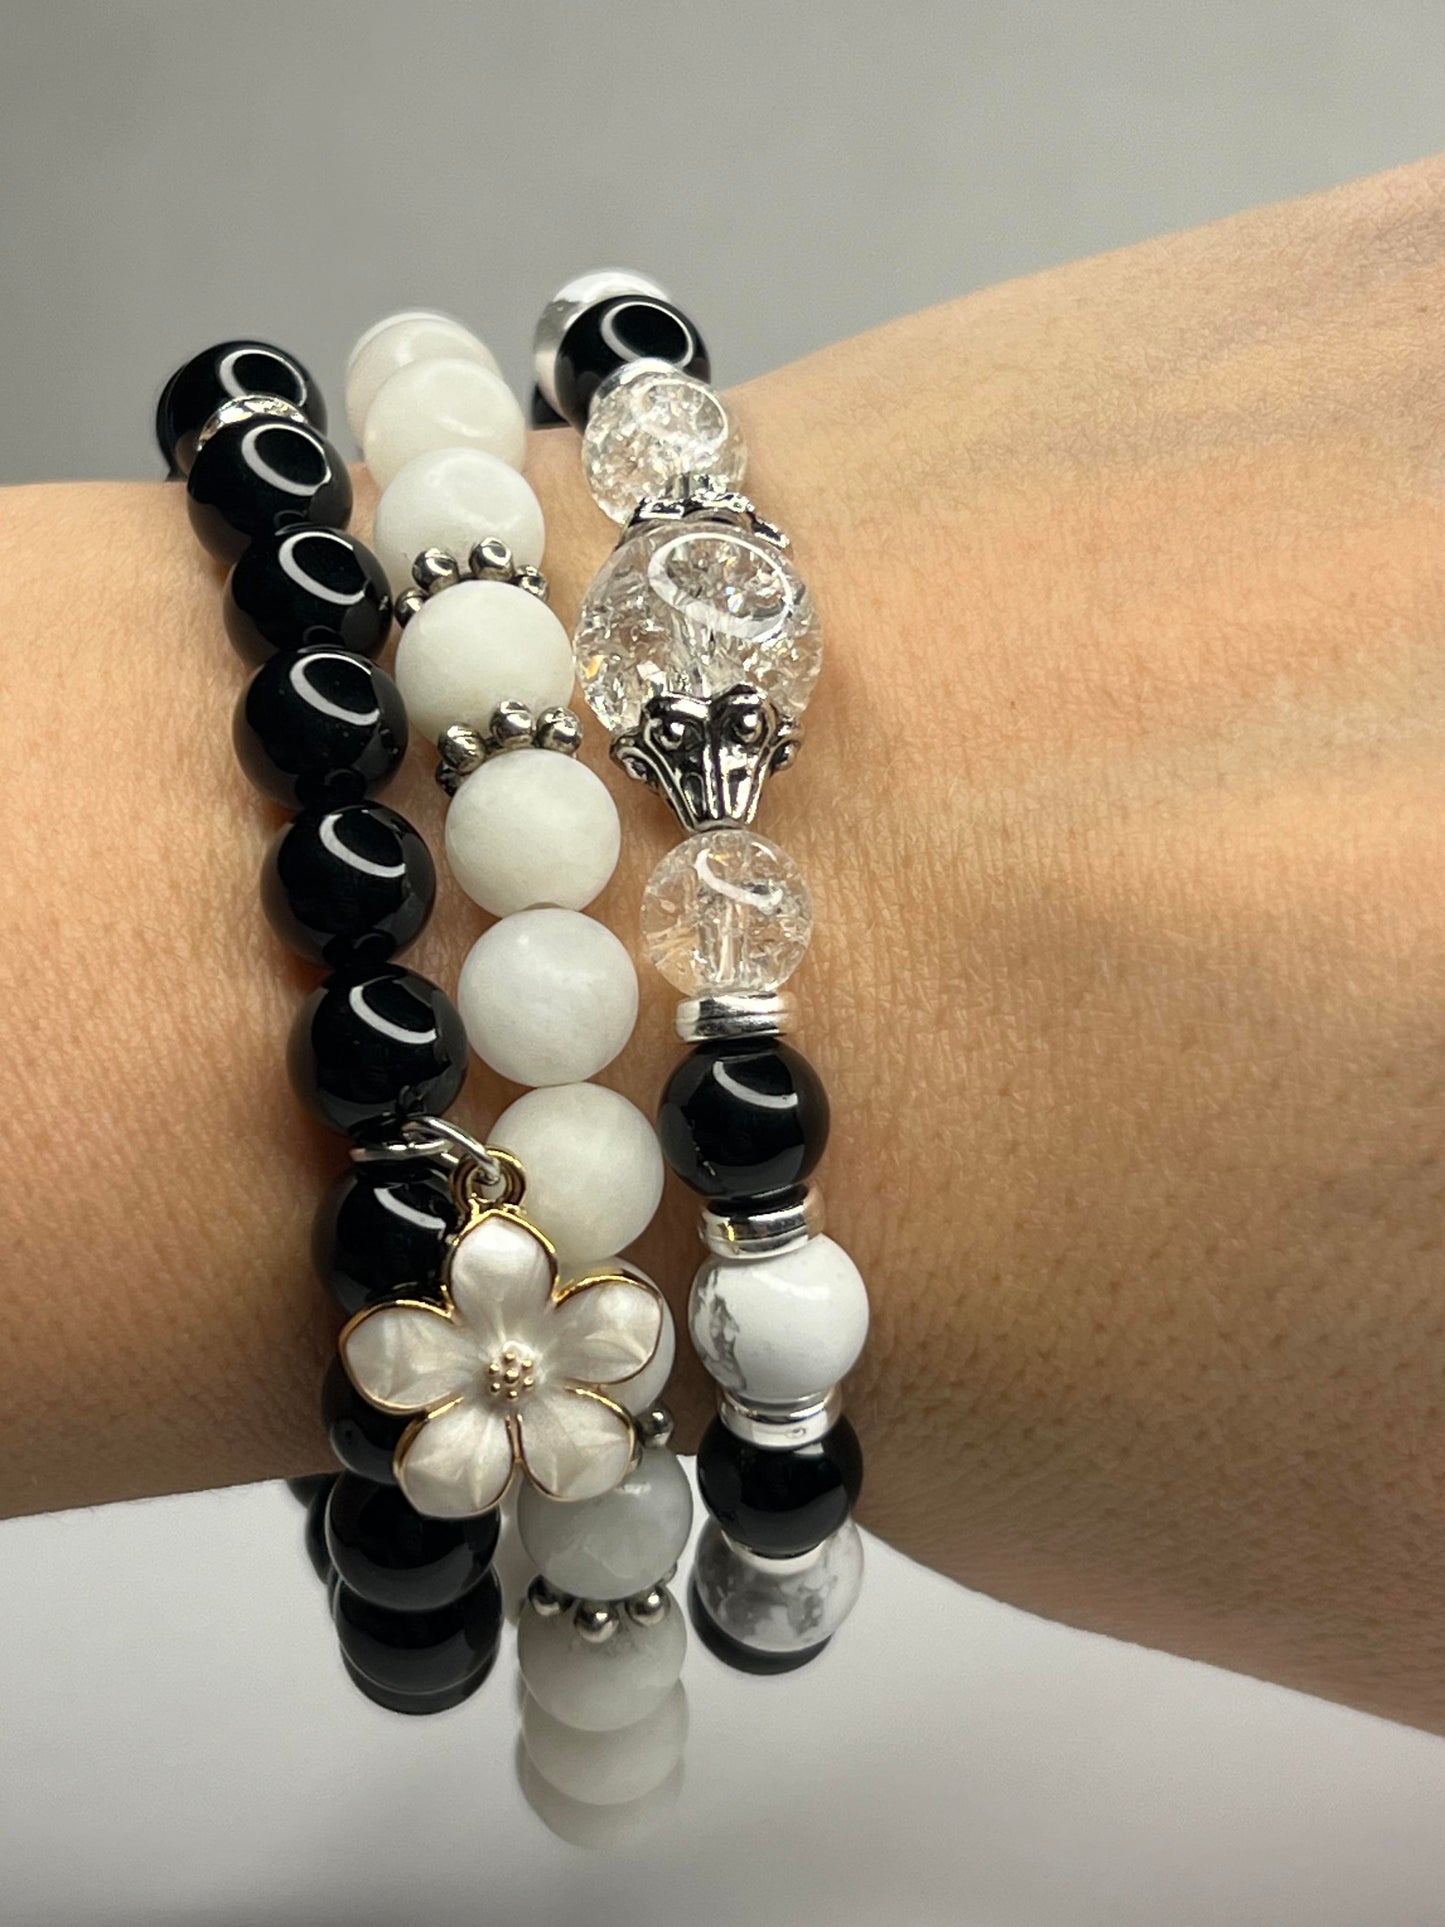 Howlite with Pure Crystals, Black Onyx and Steel